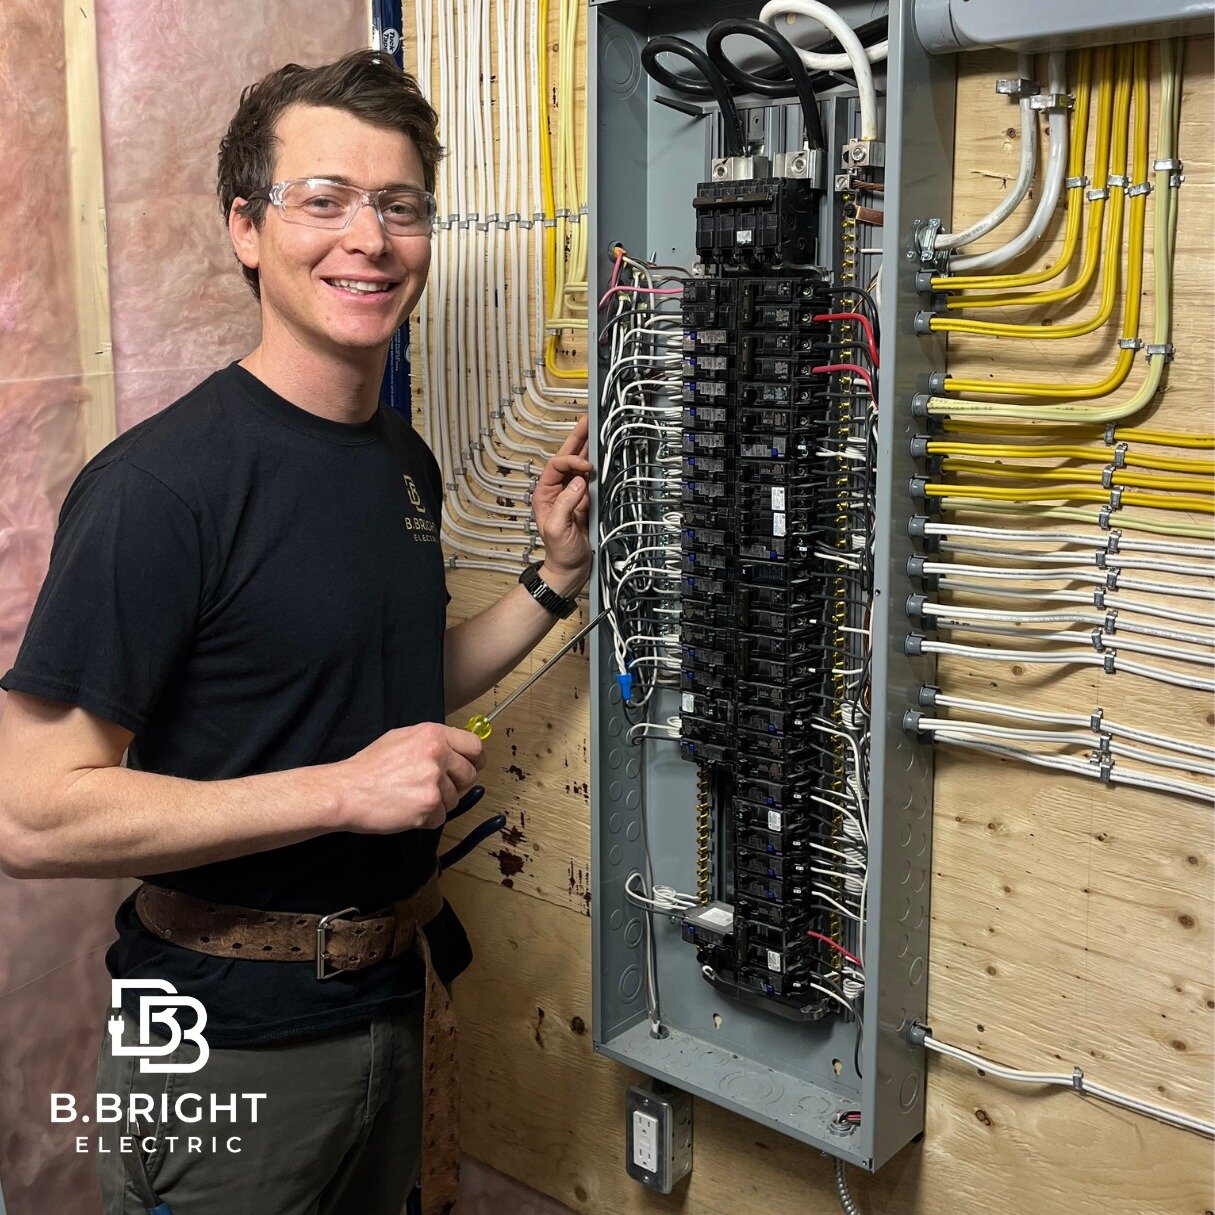 New website coming soon! We're excited to launch B.Bright Electric into the Peterborough and surrounding areas and now online, too!

A little about our master electrician, John Beebe, of B.Bright Electric...with over 17 years of experience in the ele